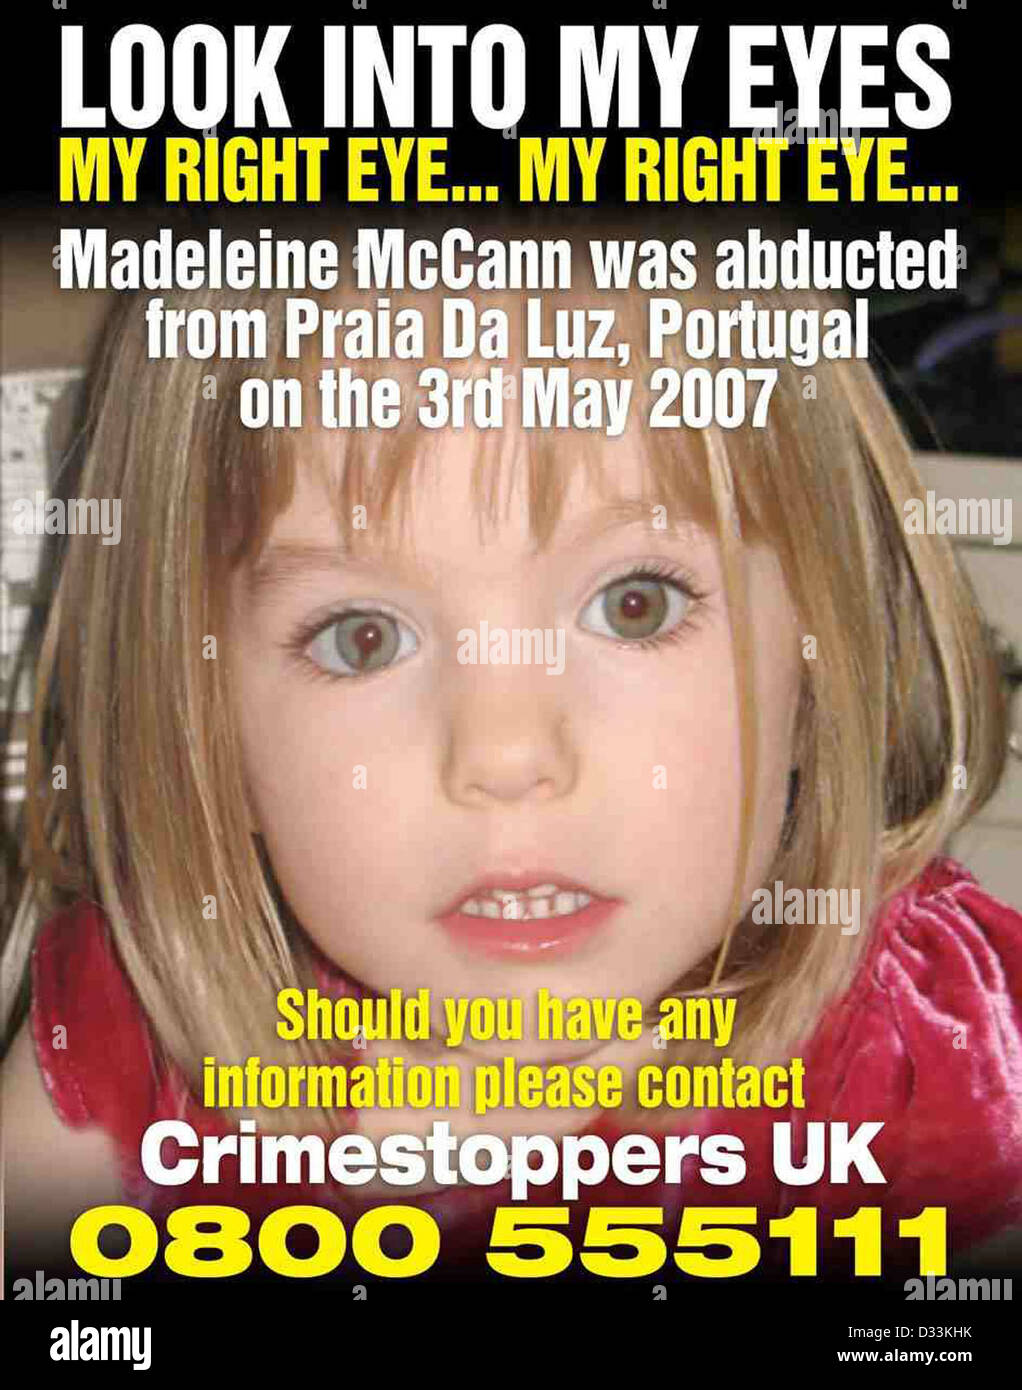 A Crimestoppers poster appealing for information regarding Missing British child Madeleine Mccann 3. Stock Photo